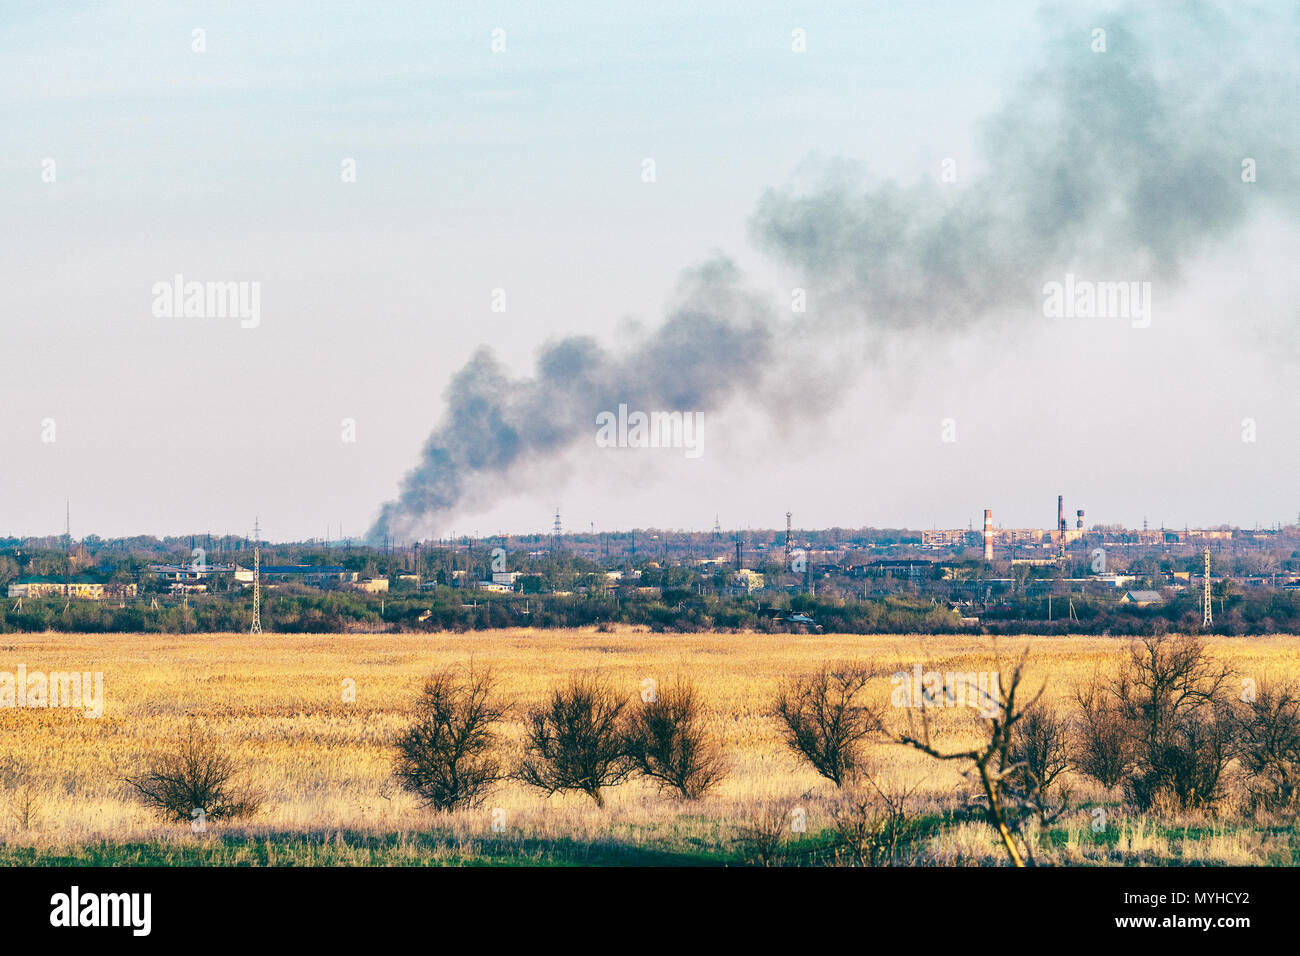 Smoke from a fire in the distance Stock Photo - Alamy